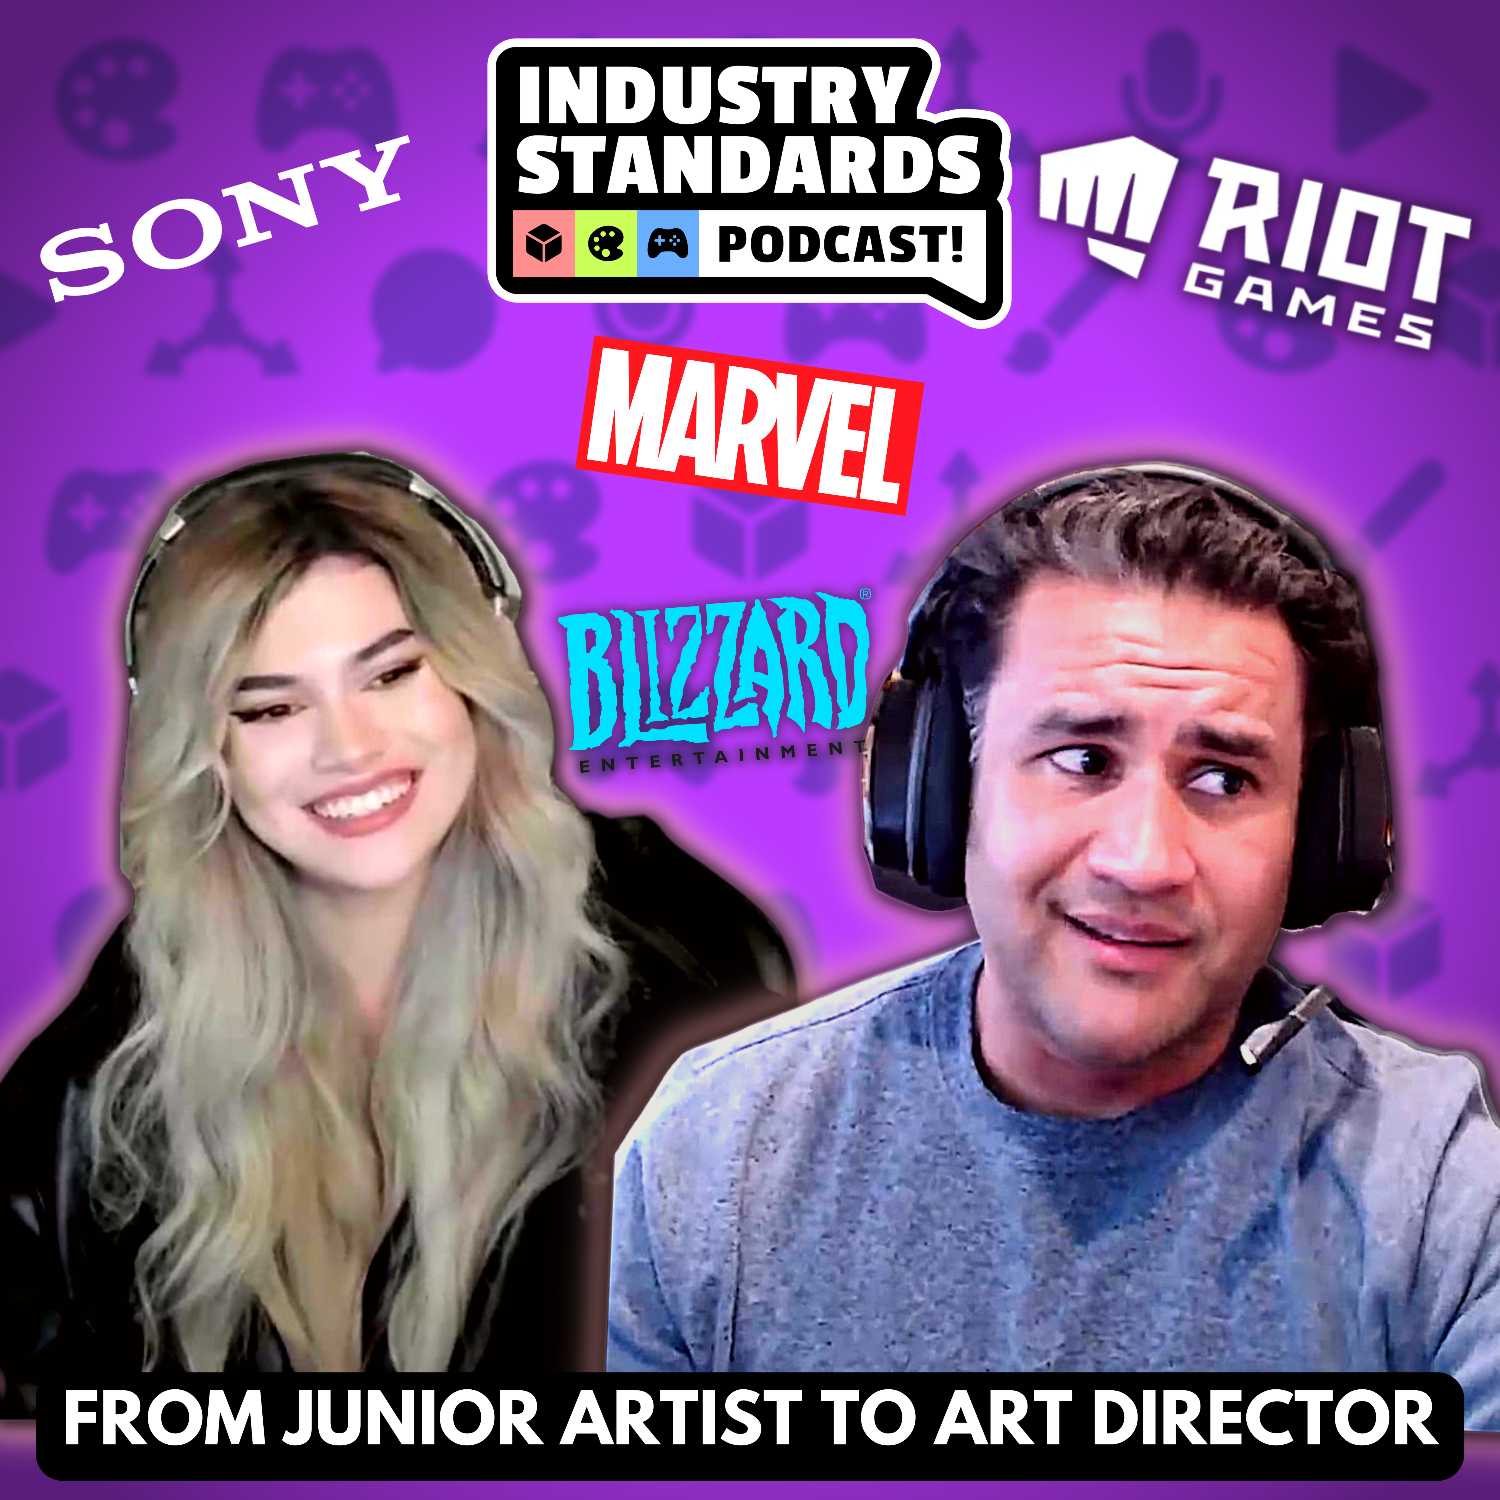 Joshua Singh, Art Director at Marvel, talks about hiring artists, AAA development, salaries, and more - Episode 1